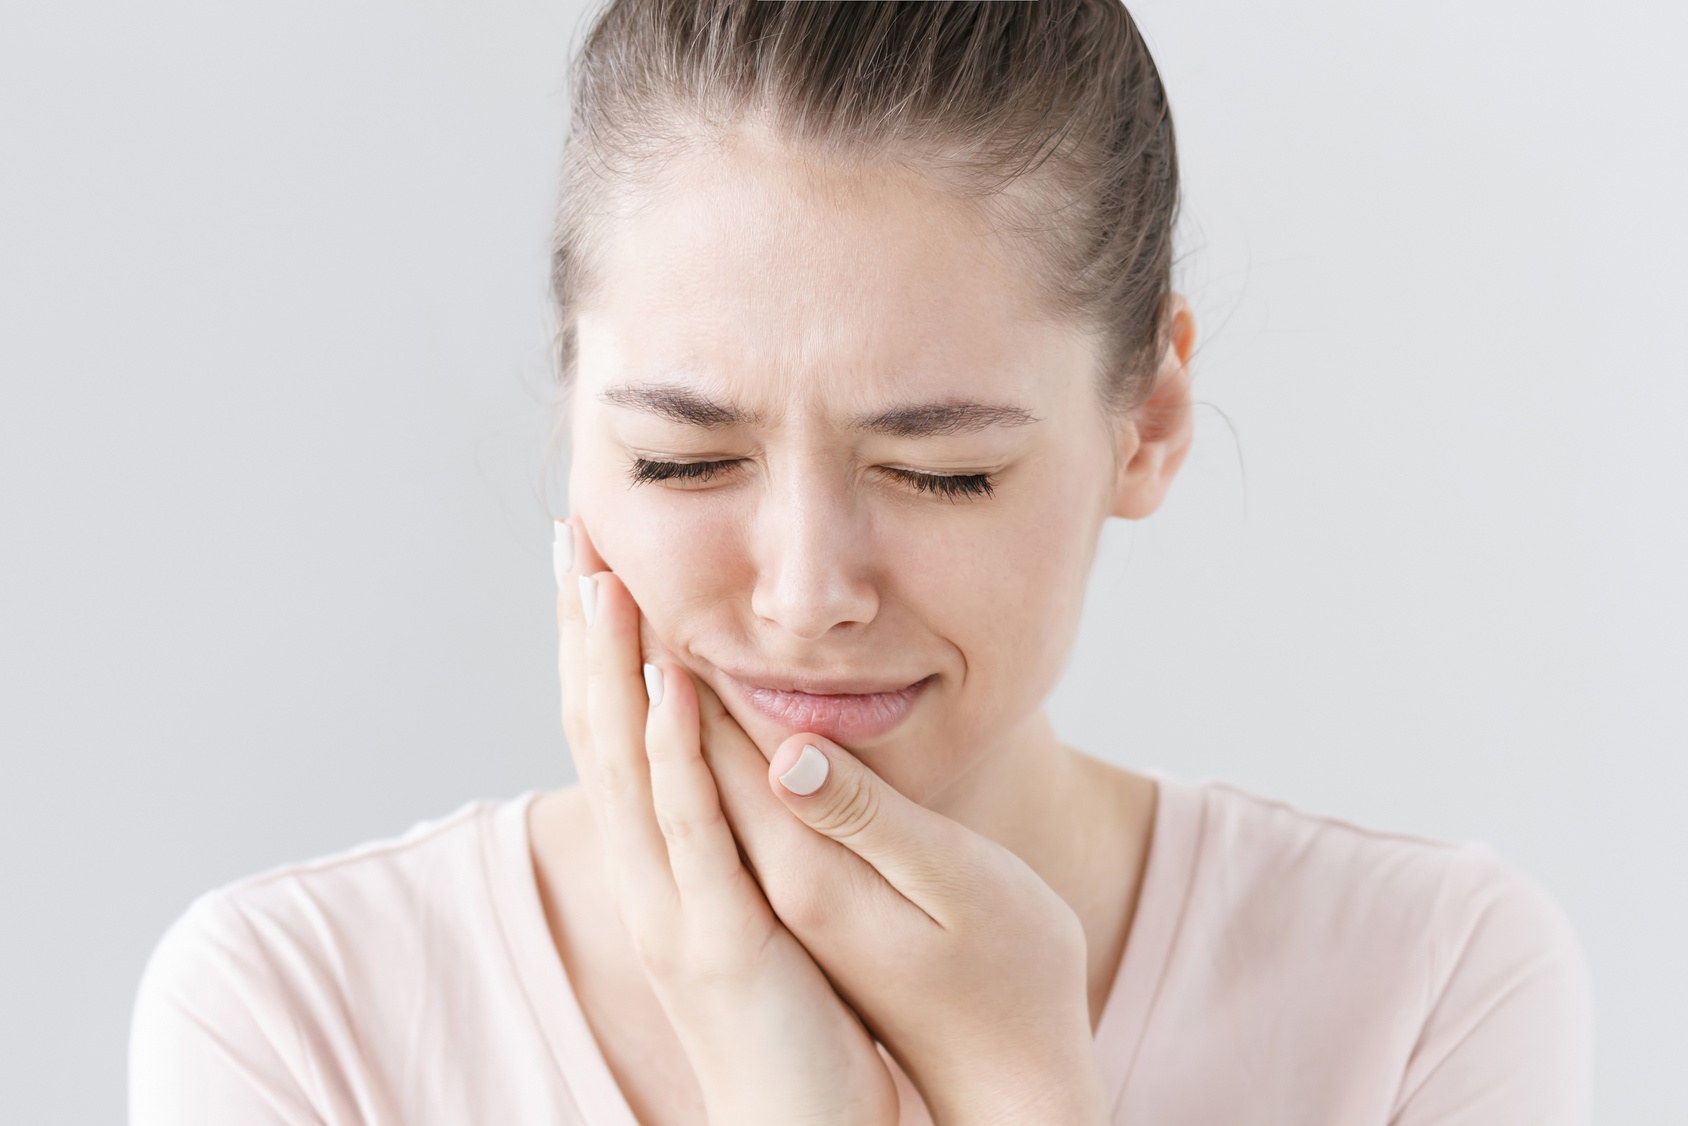 Does Vinegar Help Tooth Pain